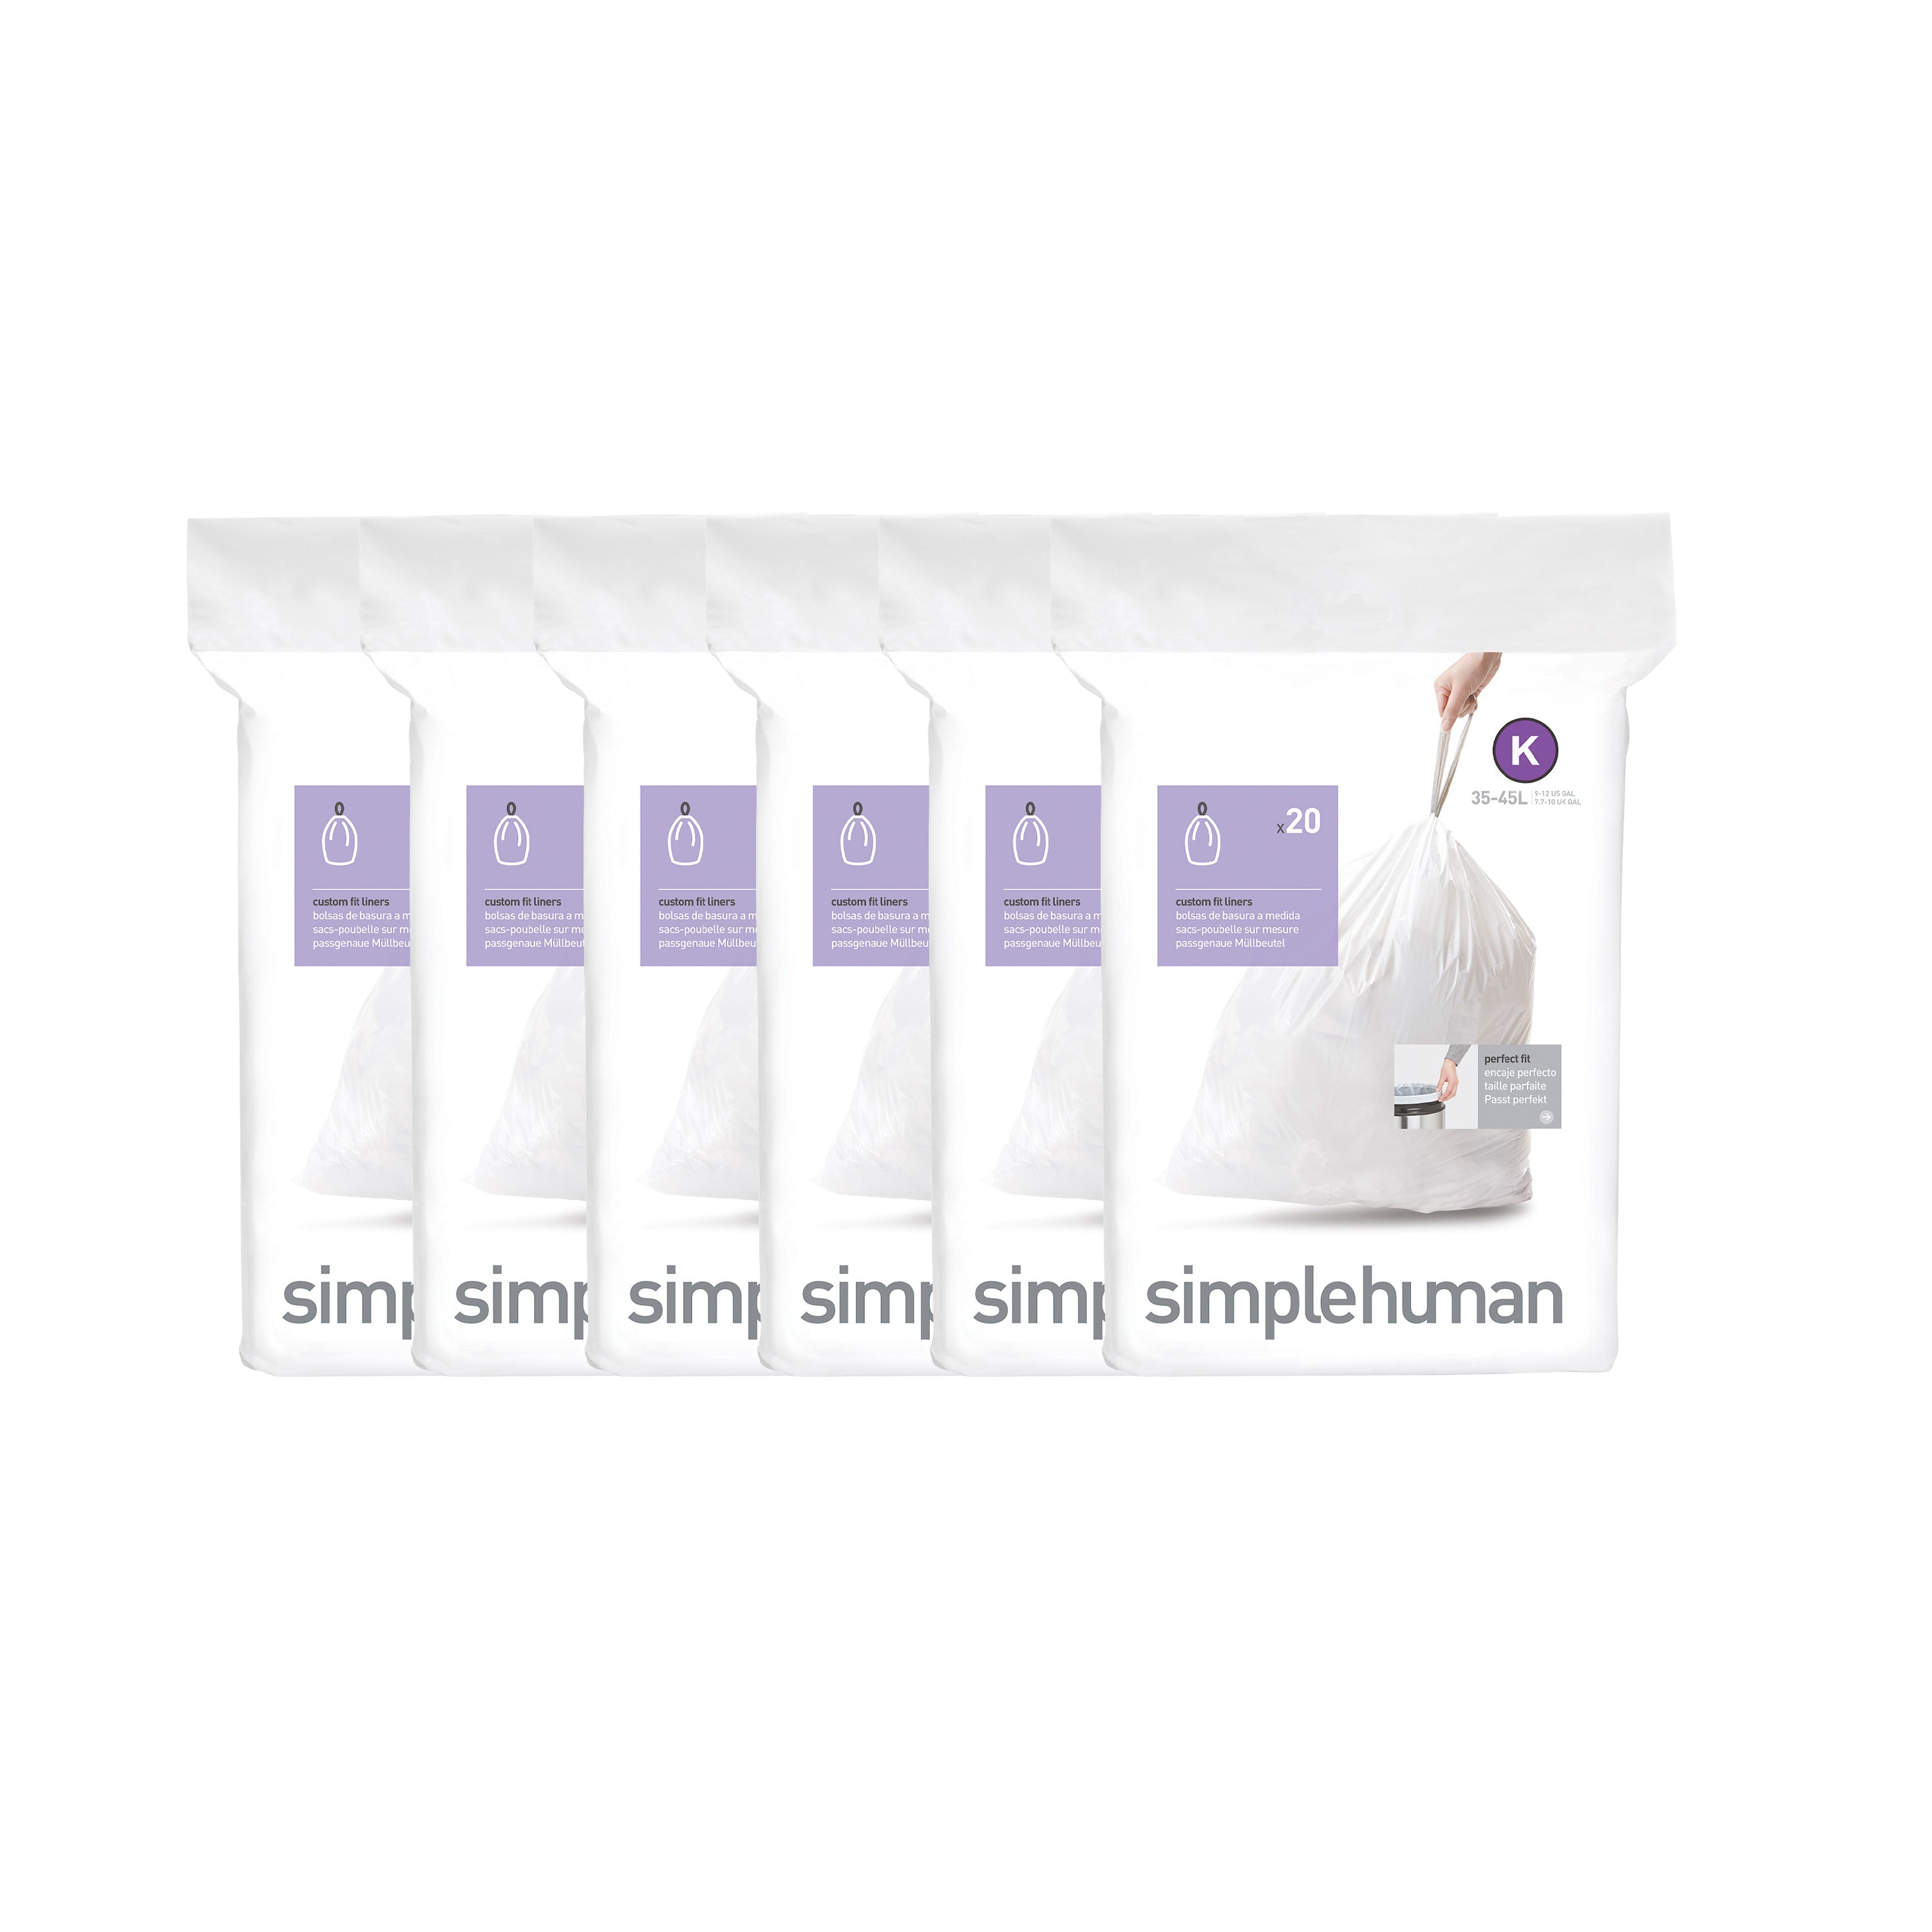 Simplehuman Code K Custom Fit Liners Extra Strong 20 Trash Bags 35